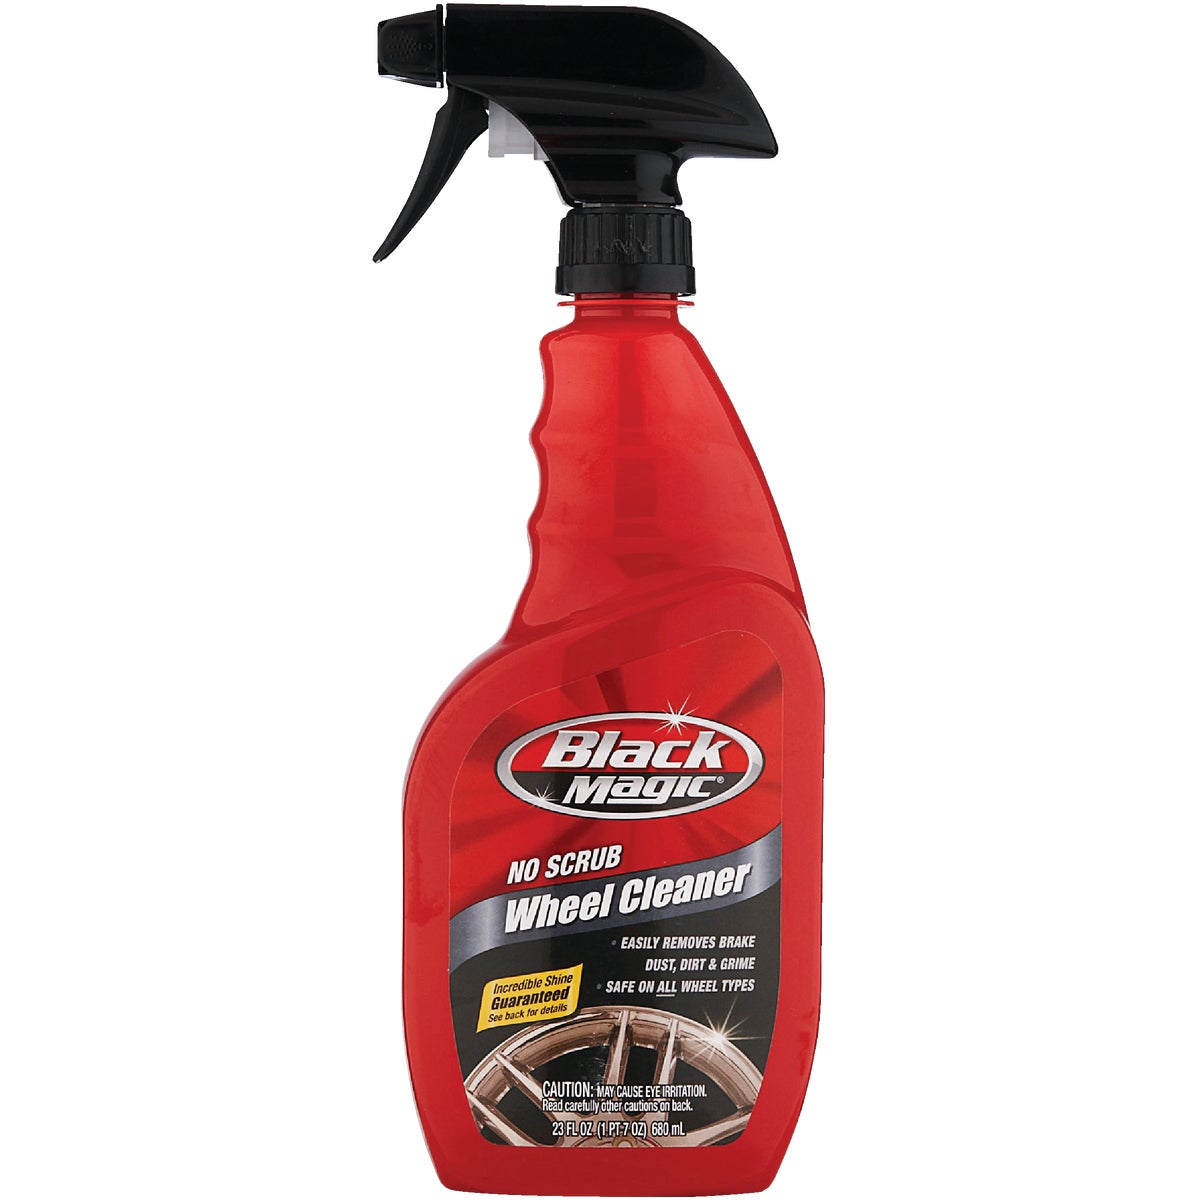 Item 579203, Black Magic No Scrub Wheel Cleaner dissolves grease, grime, oil and road 